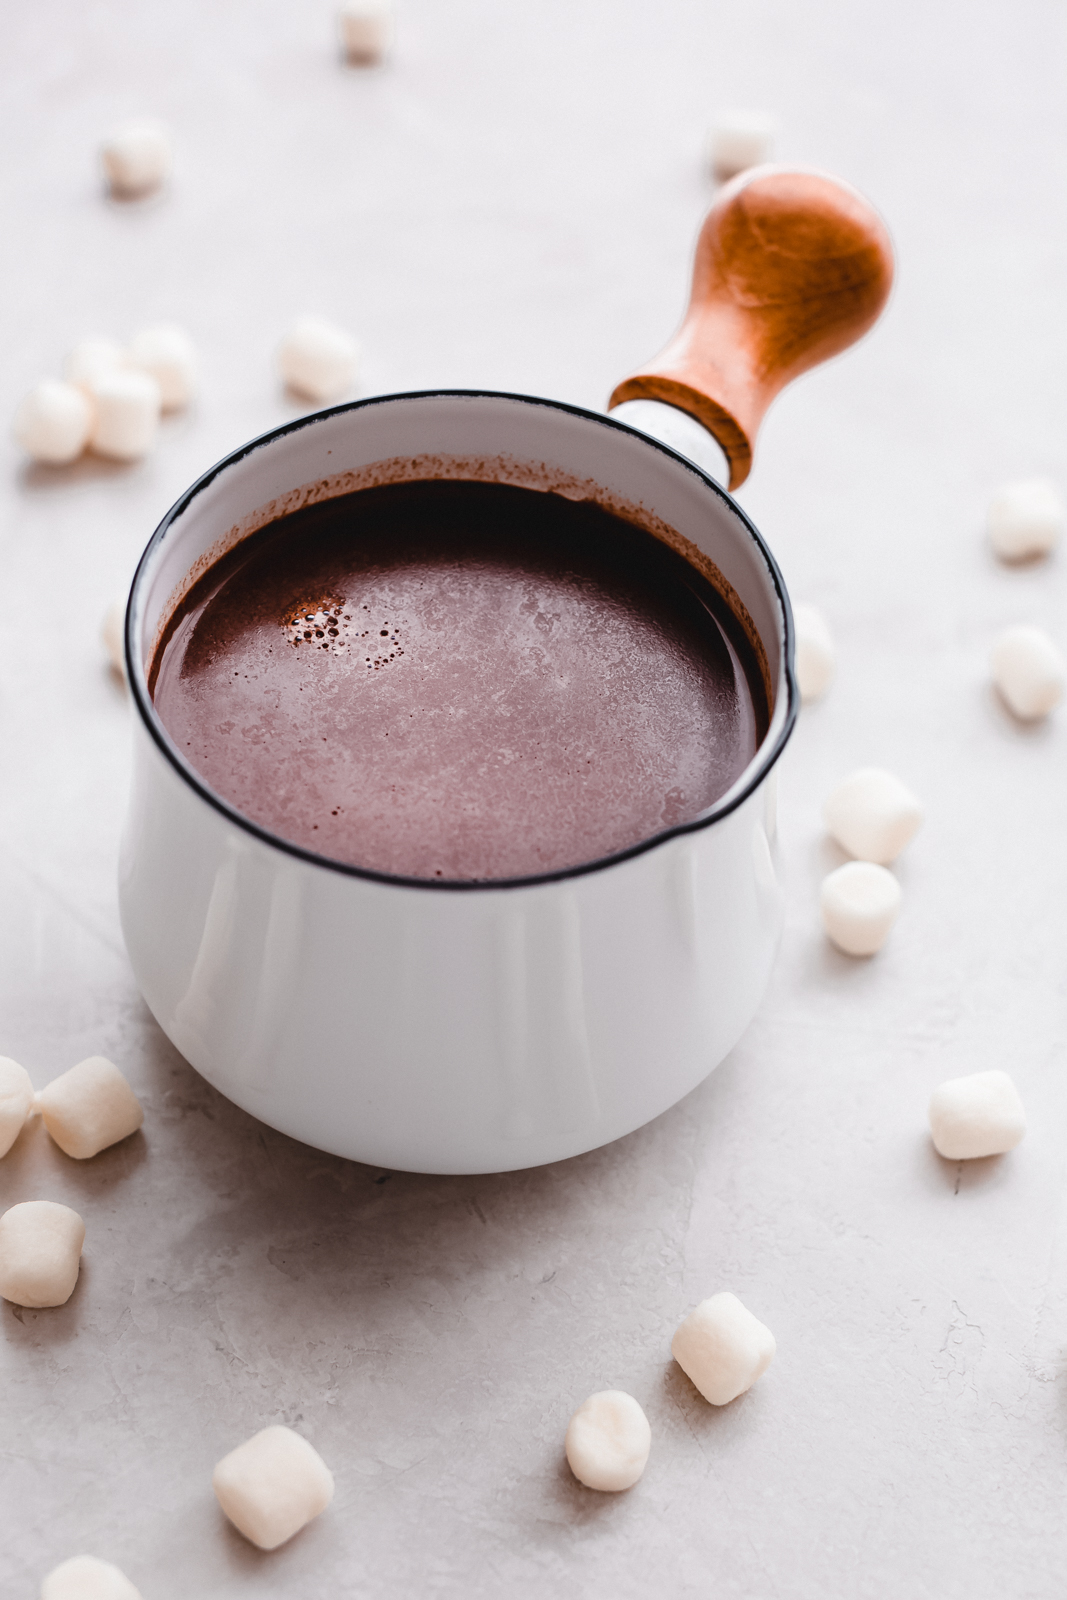 hot chocolate for two in a white saucepan with wooden handle